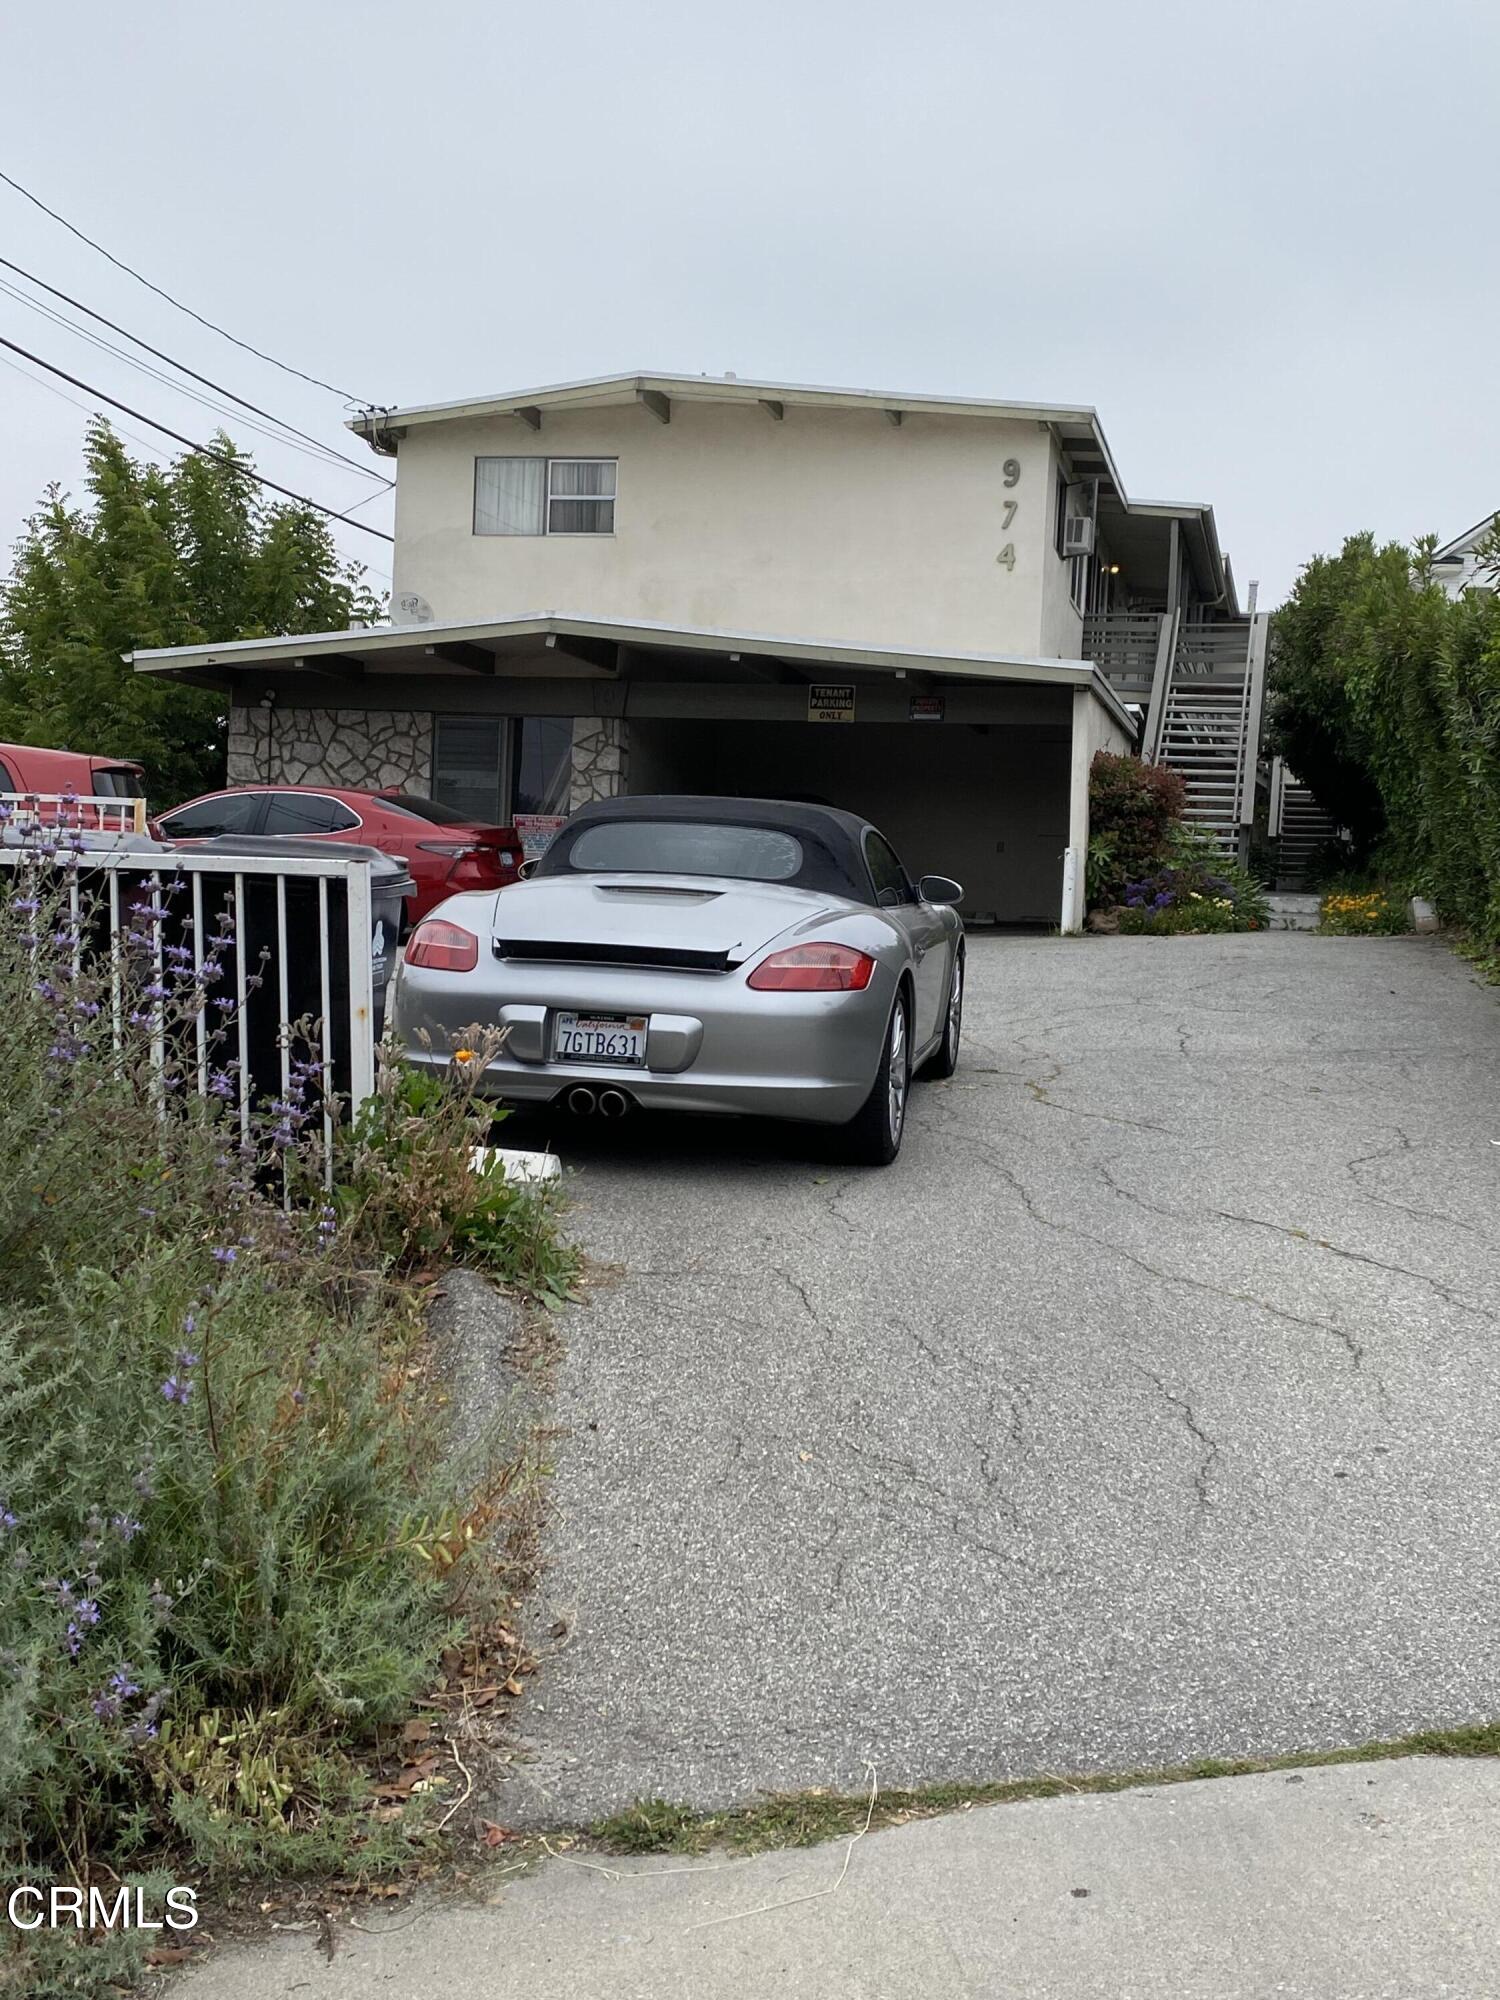 a view of garage with a car parked in it